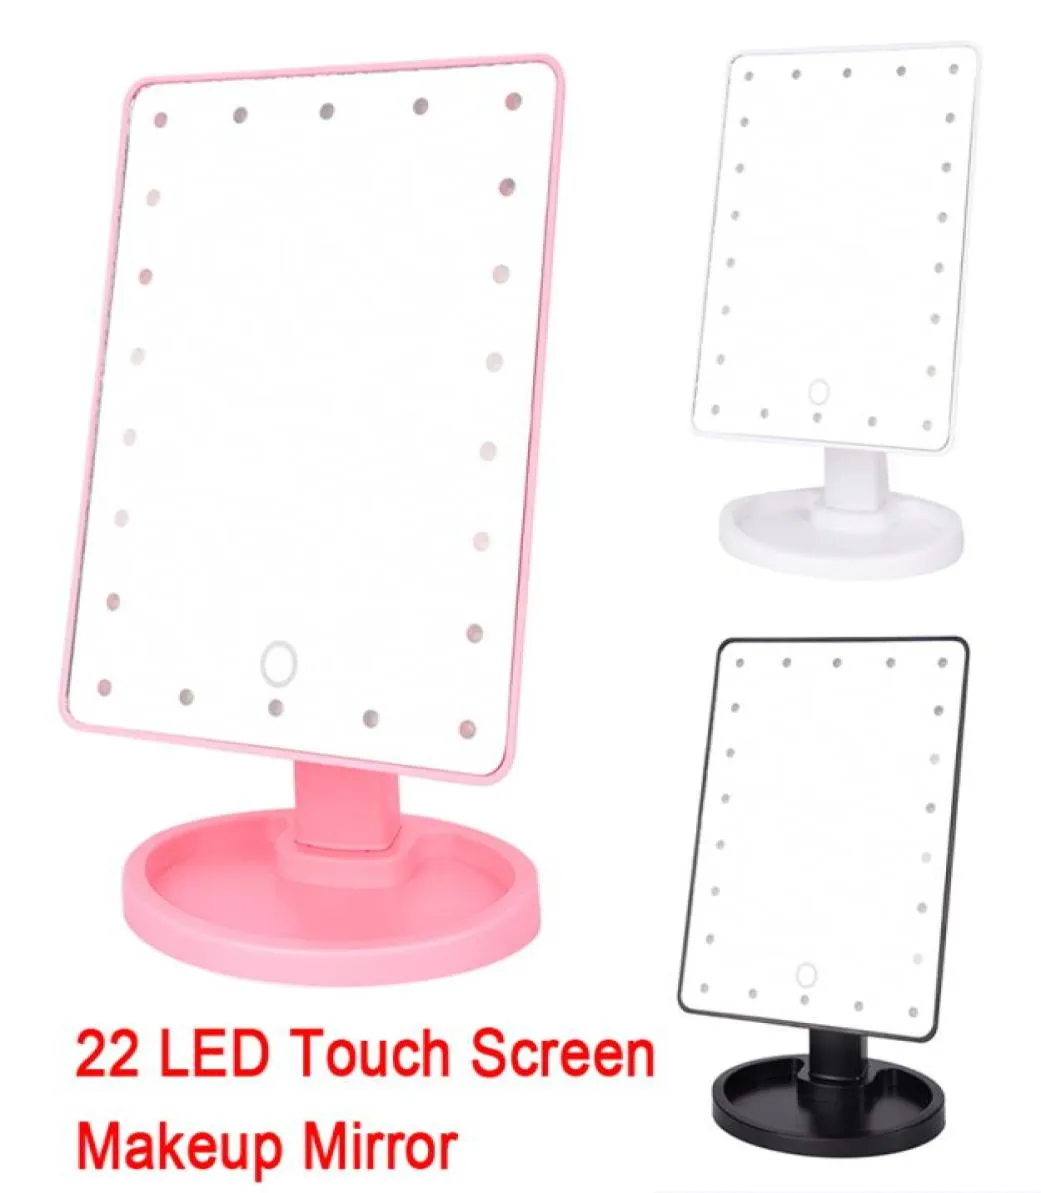 22 LED Touch SN Makeup Mirror Professional Vanity Light Light